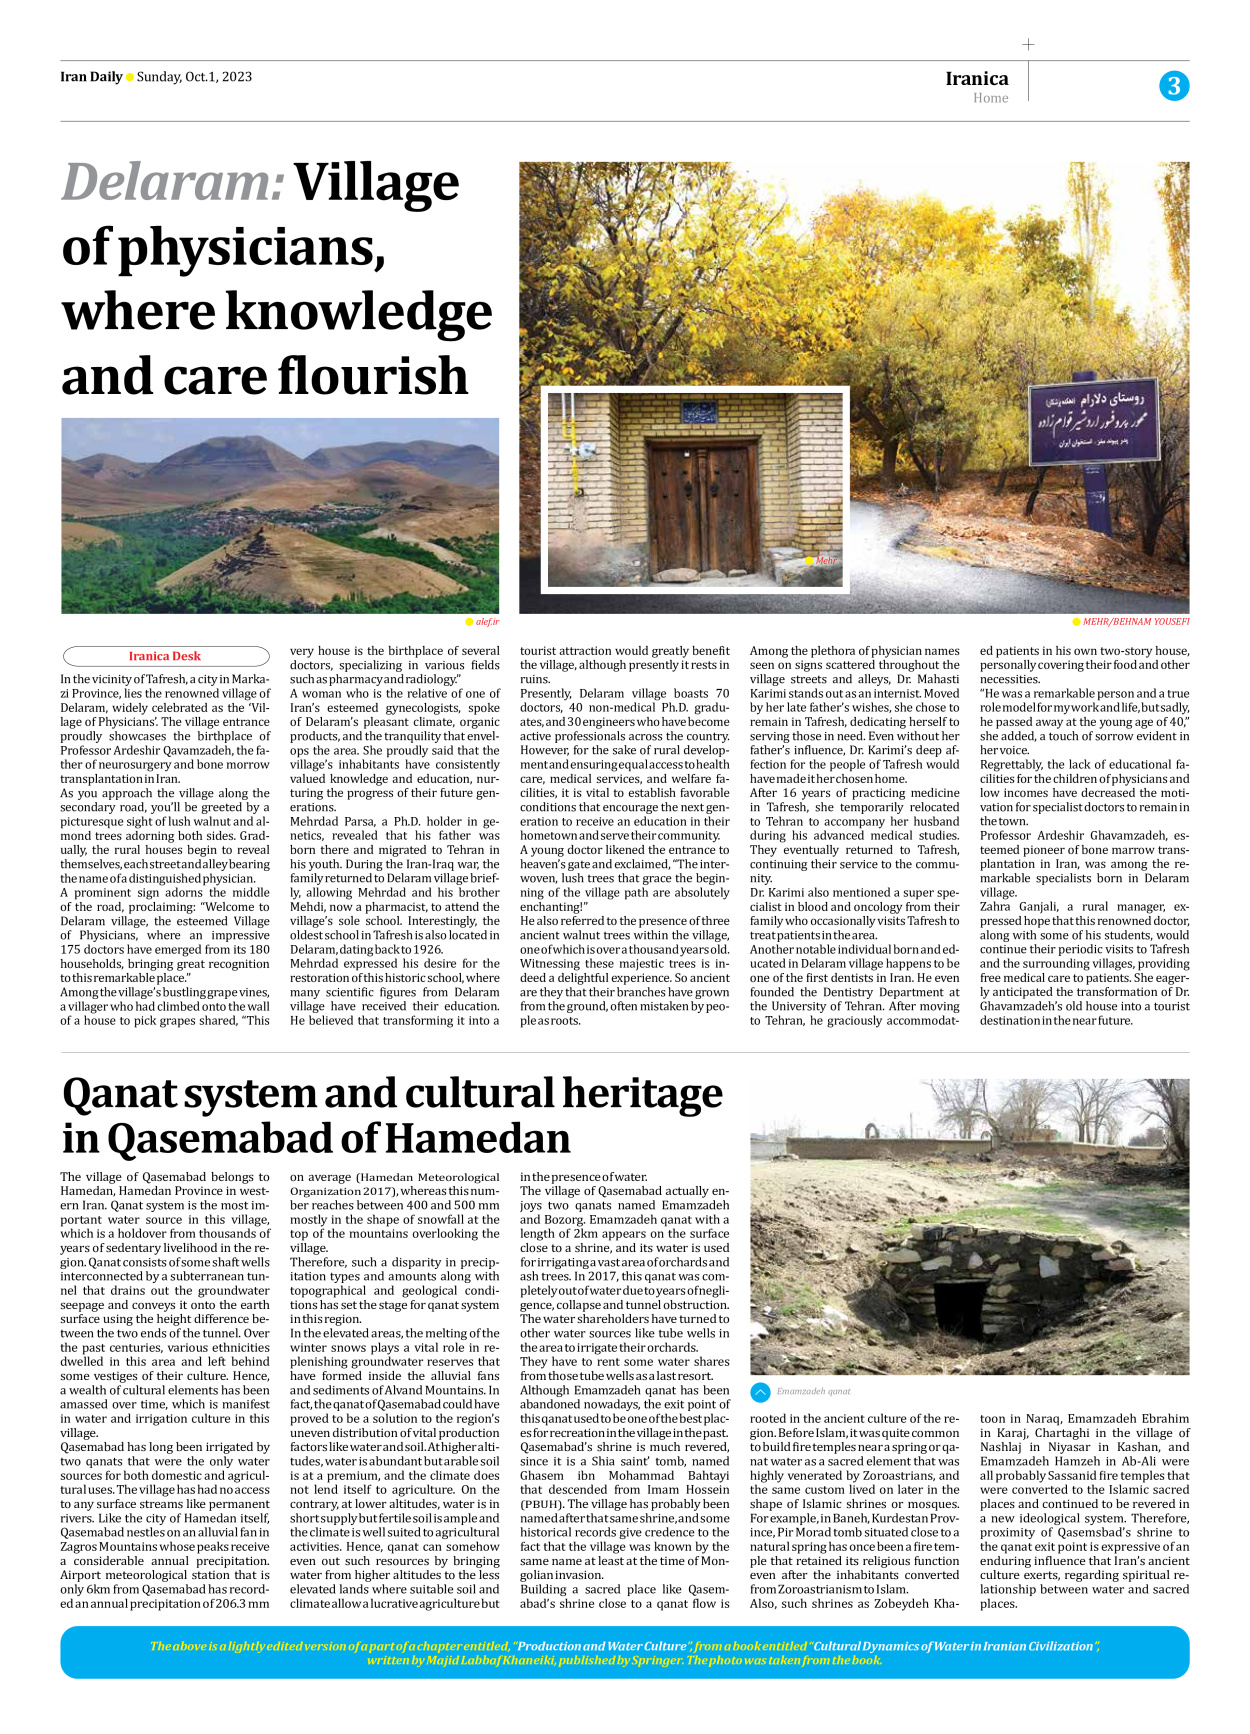 Iran Daily - Number Seven Thousand Three Hundred and Ninety Seven - 01 October 2023 - Page 3